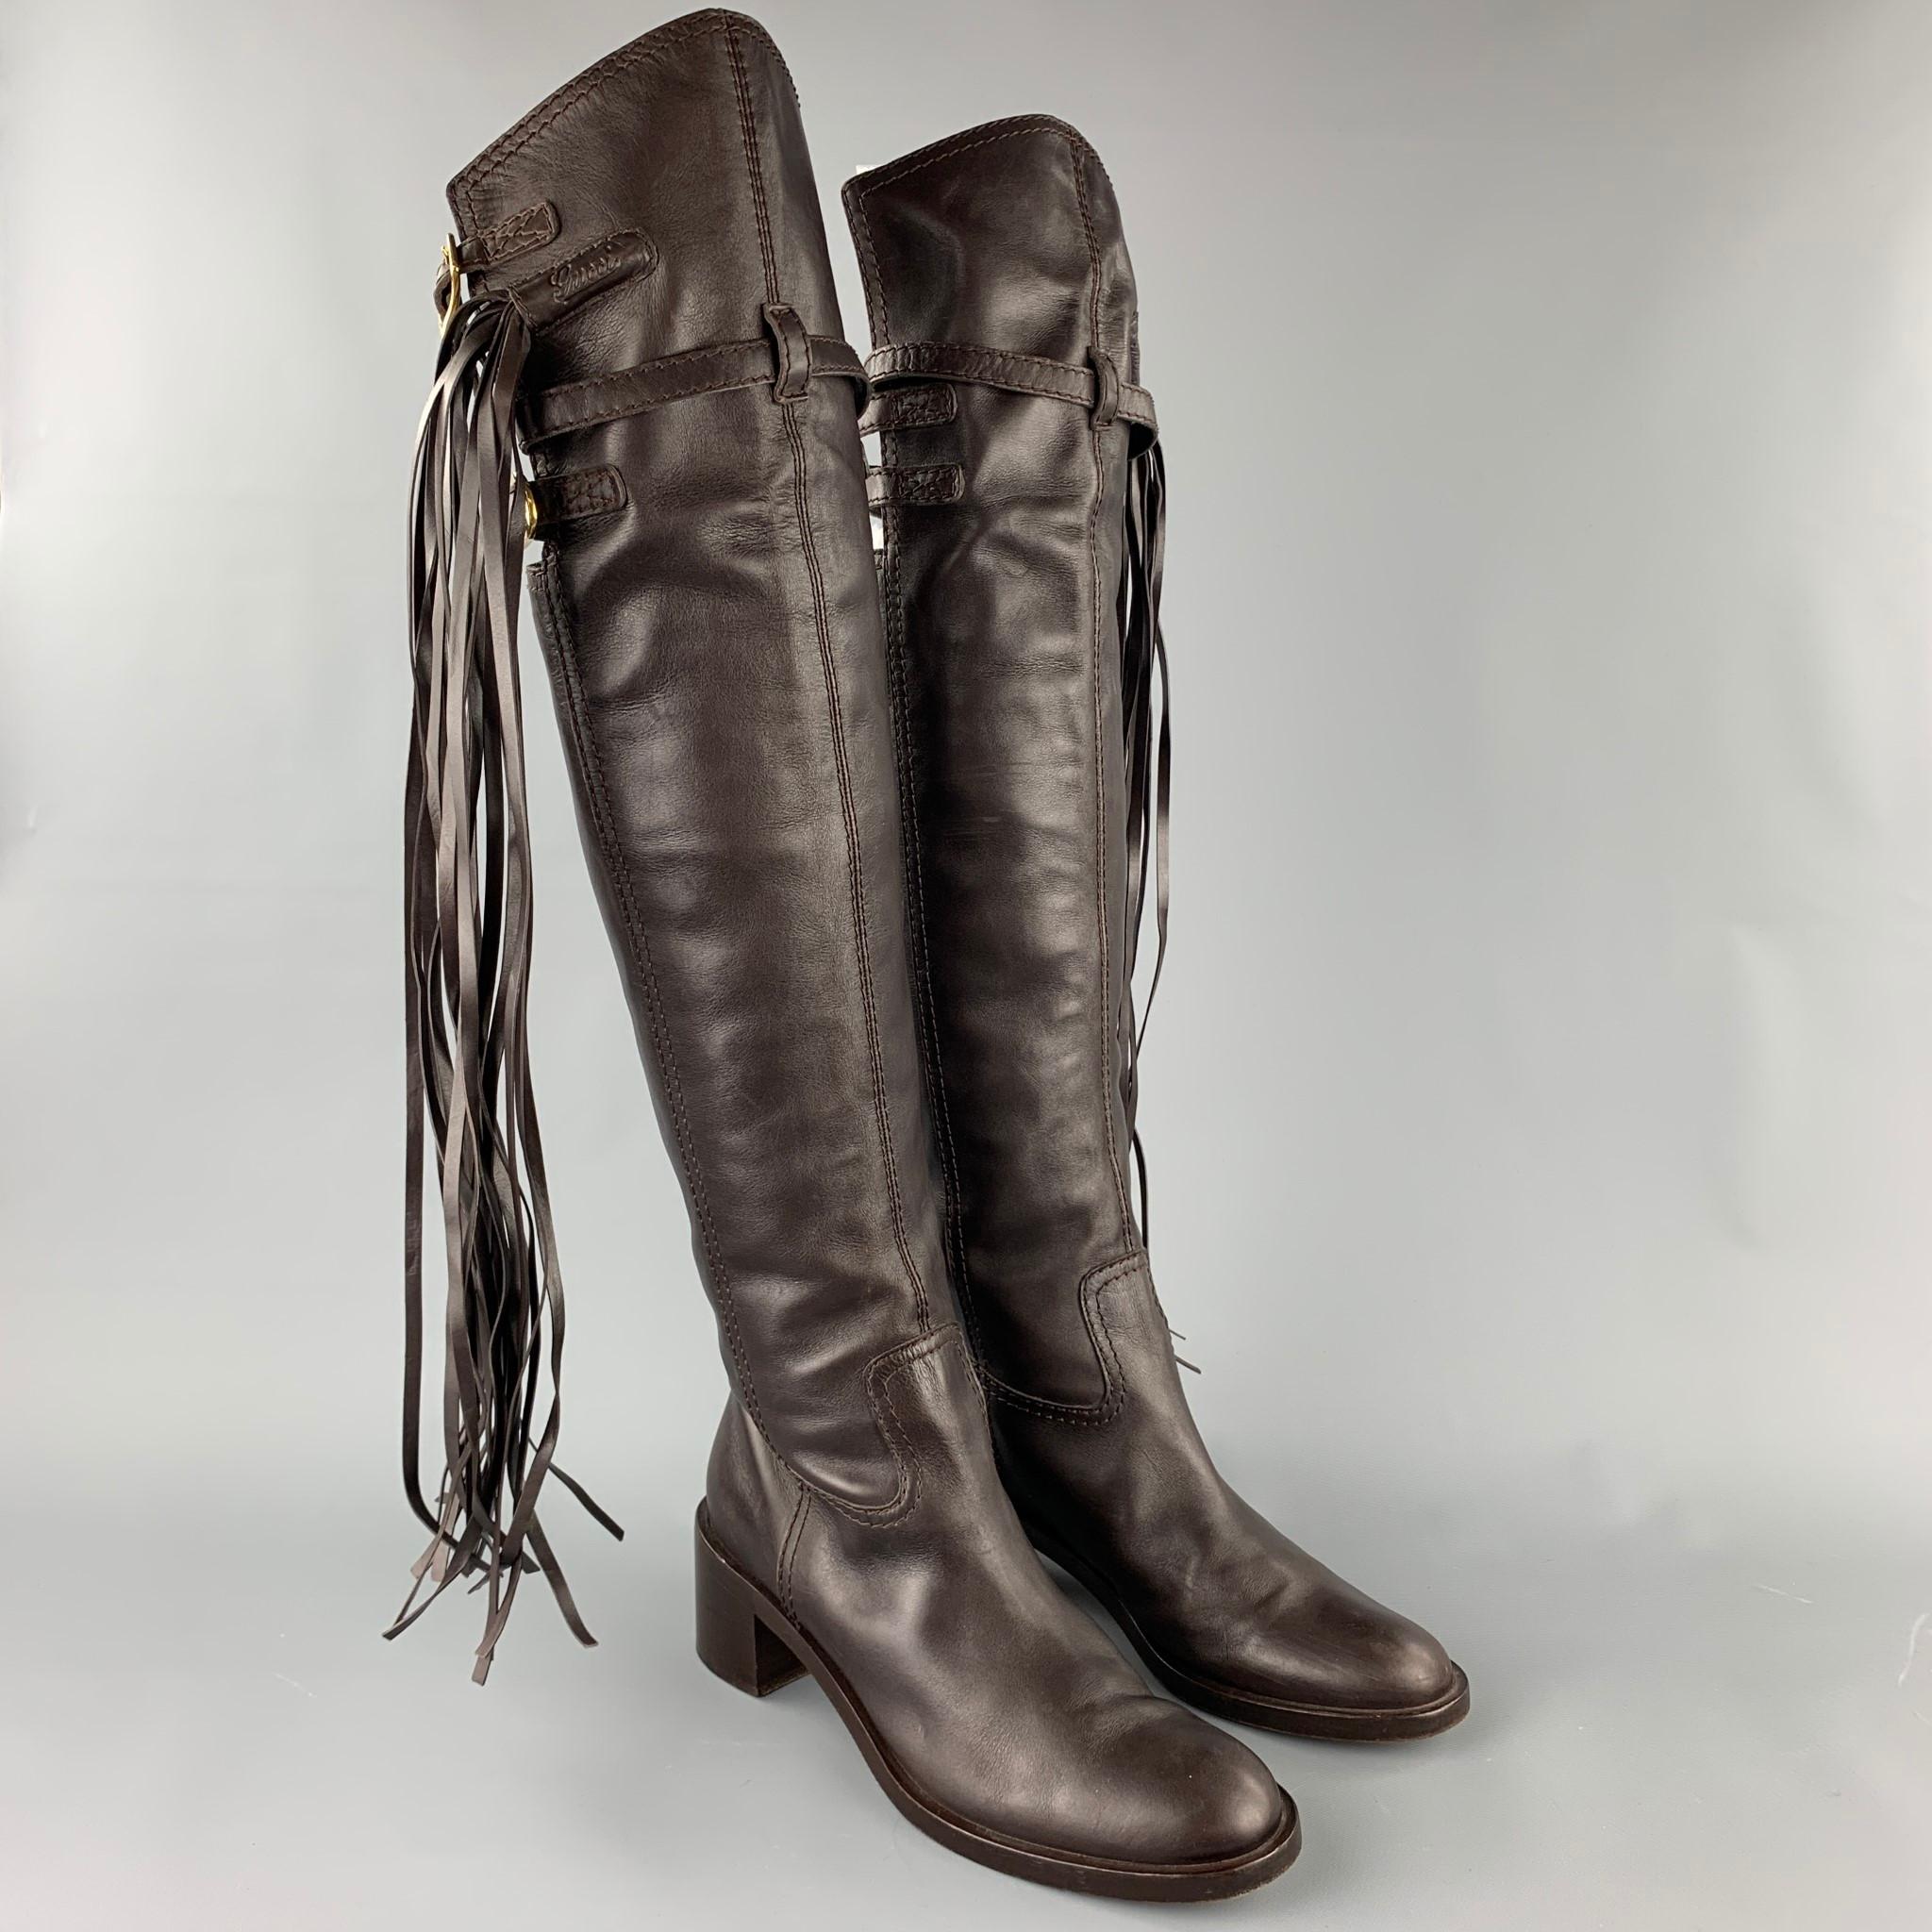 GUCCI boots comes in a brown leather featuring a over the knee style, buckle strap details on top, tassel design, pull on, and a wooden sole. Made in Italy.

Very Good Pre-Owned Condition.
Marked: EU 41
Original Retail Price: